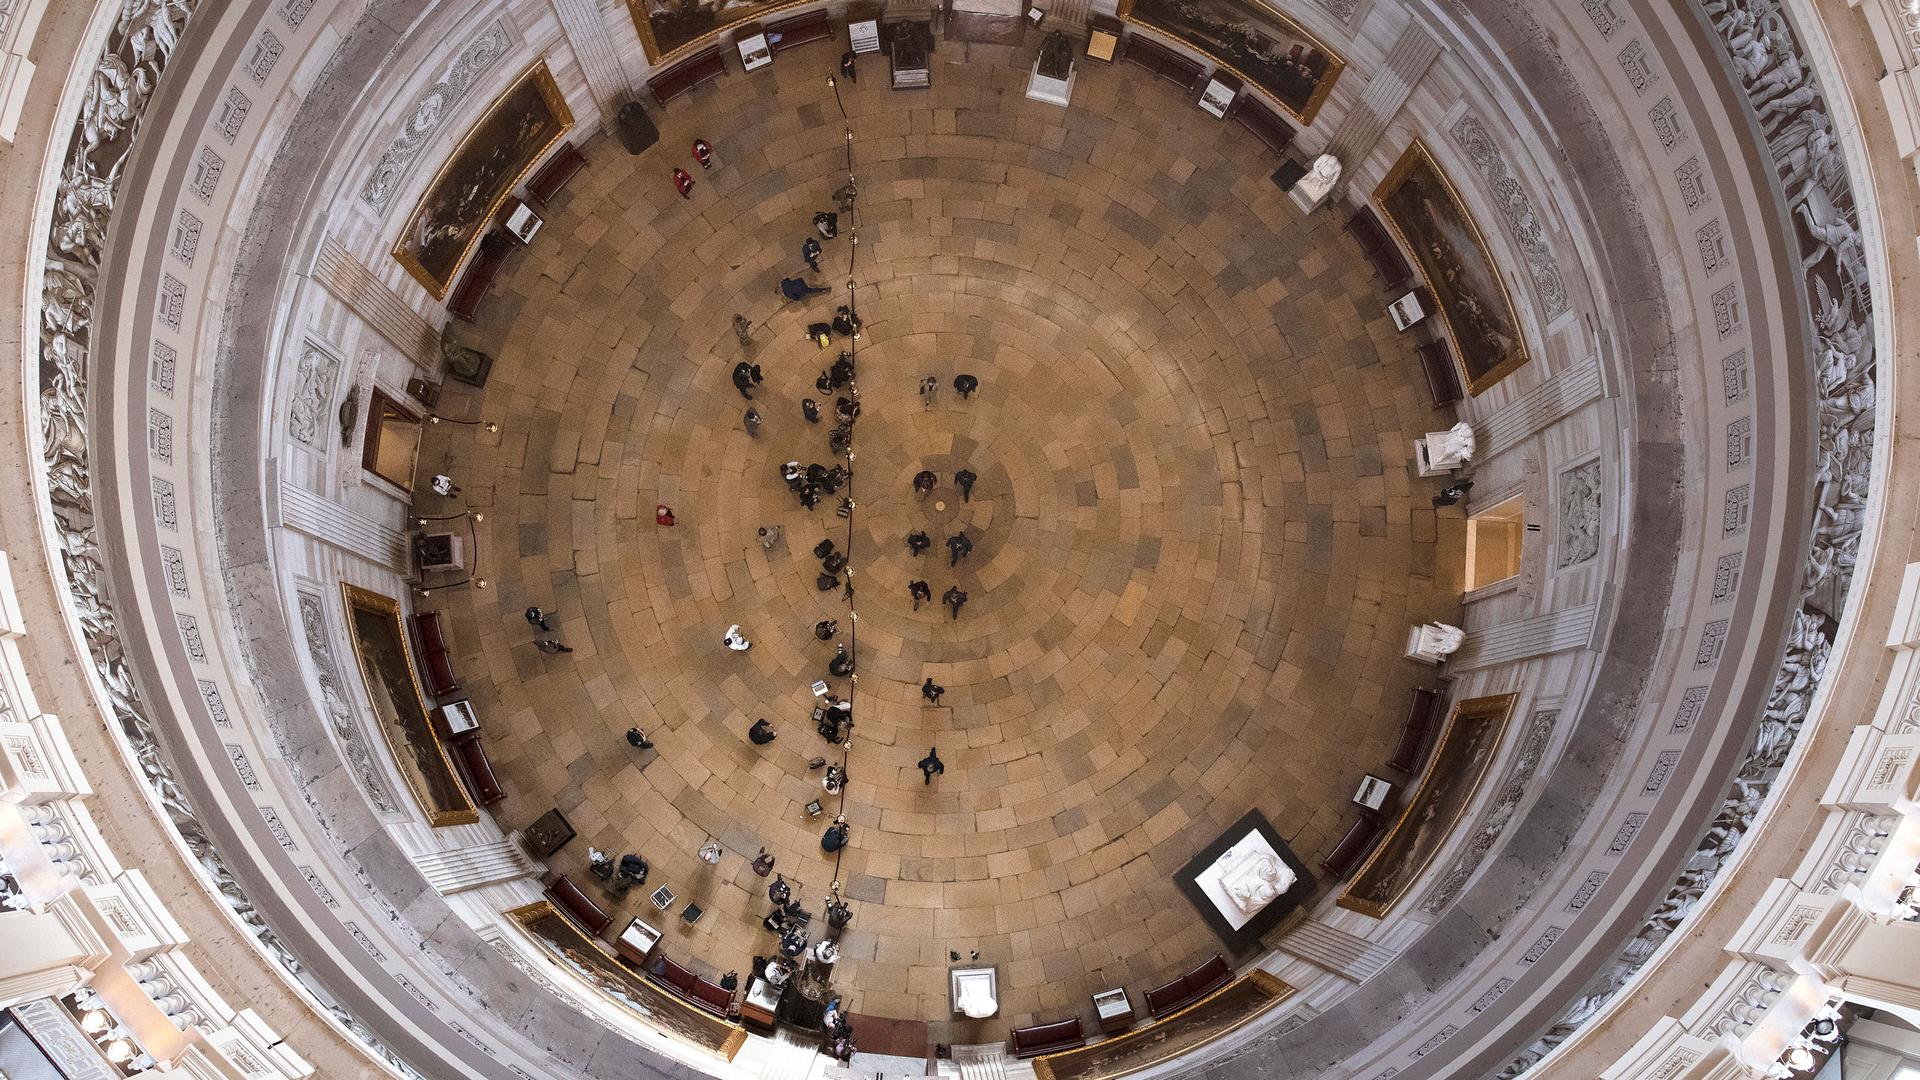 The Rotunda to the Senate is shown looking down from above with the complete circle of the space framing the composition.